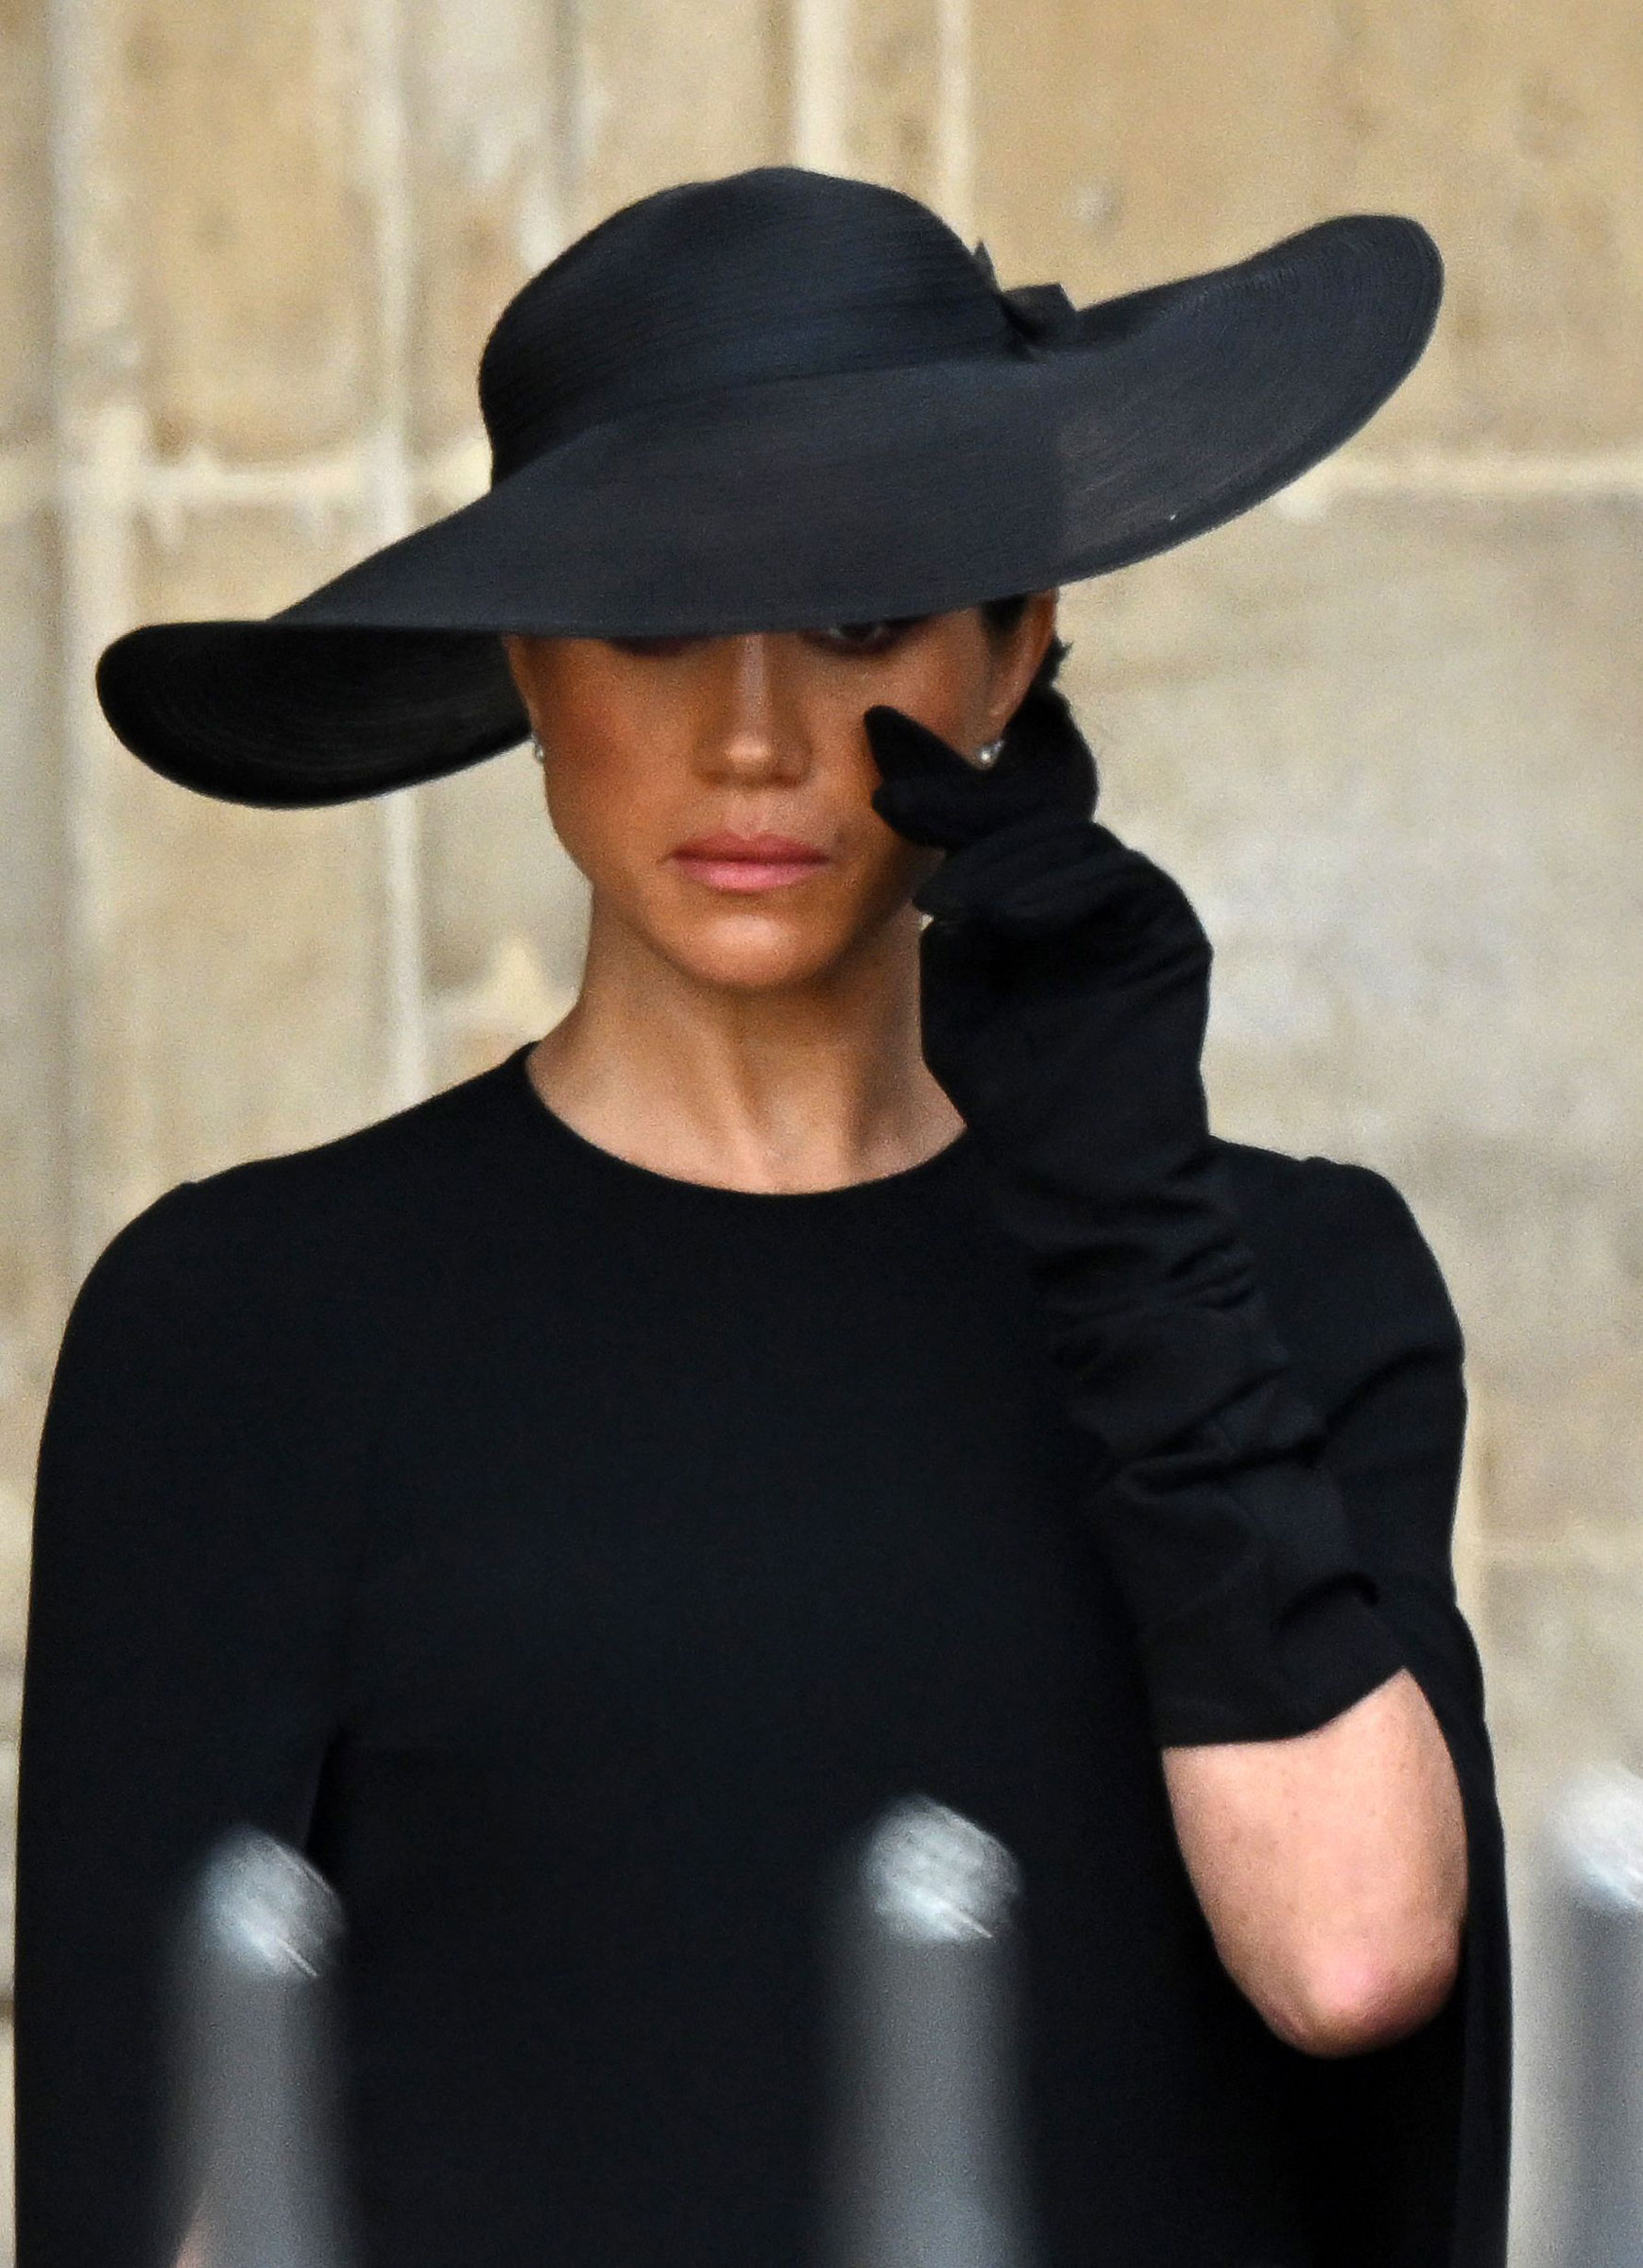 Meghan, Duchess of Sussex is seen during The State Funeral Of Queen Elizabeth II at Westminster Abbey on September 19, 2022 in London, England.